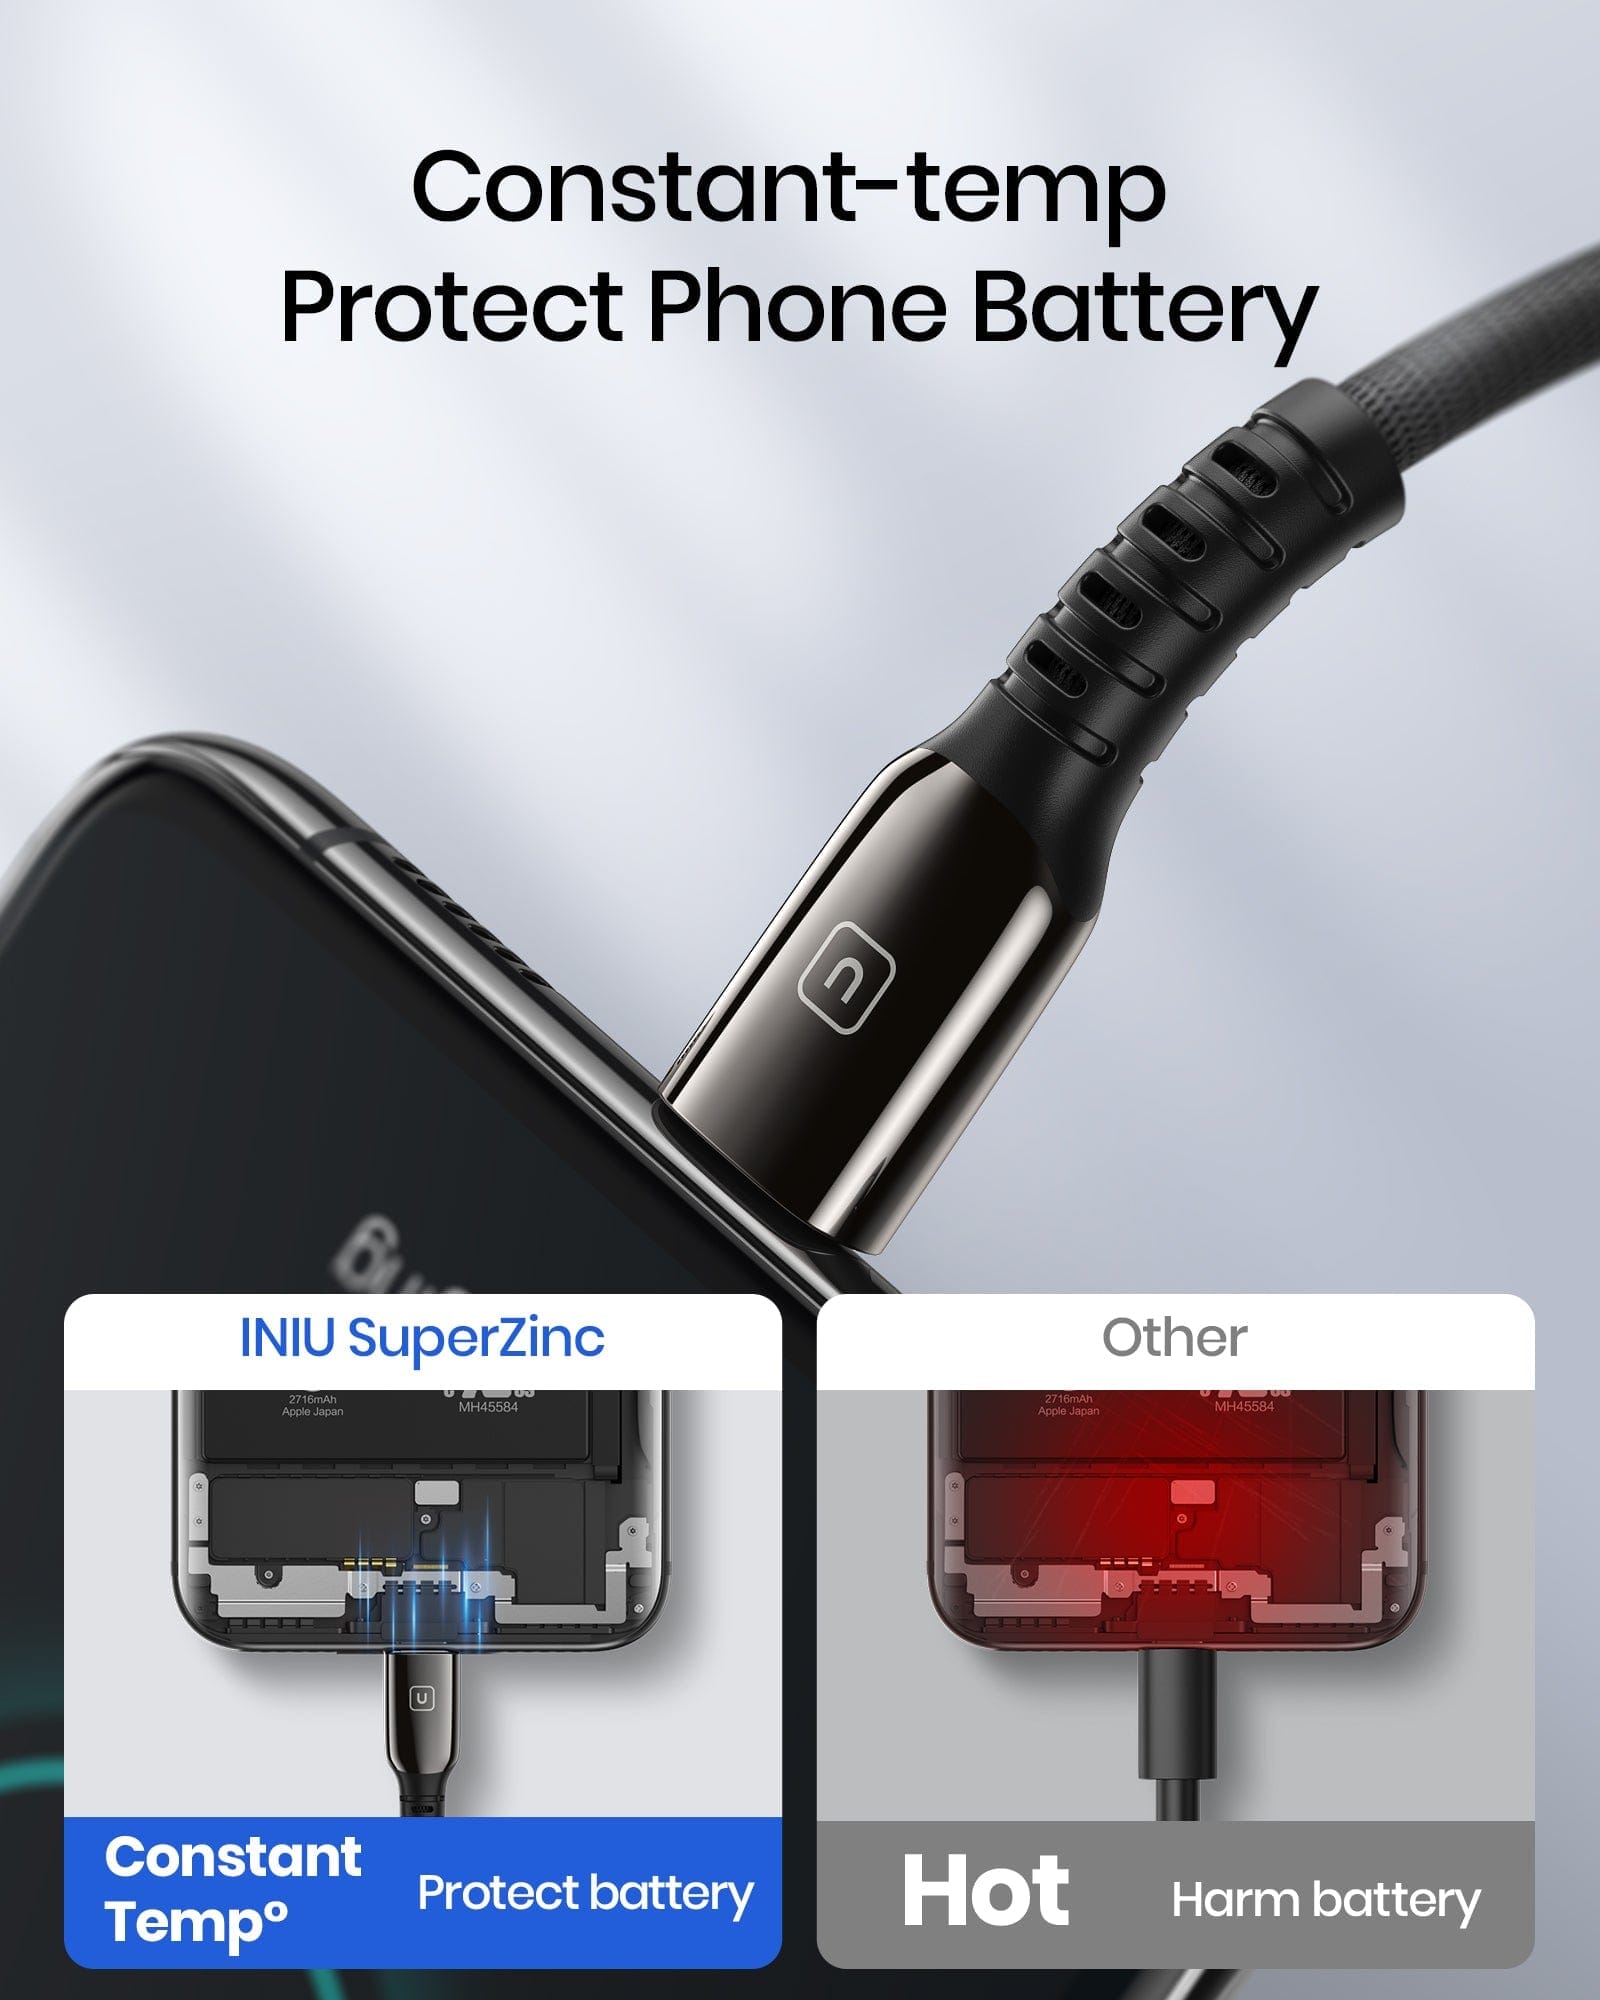 Constant-temp Protect Phone Battery